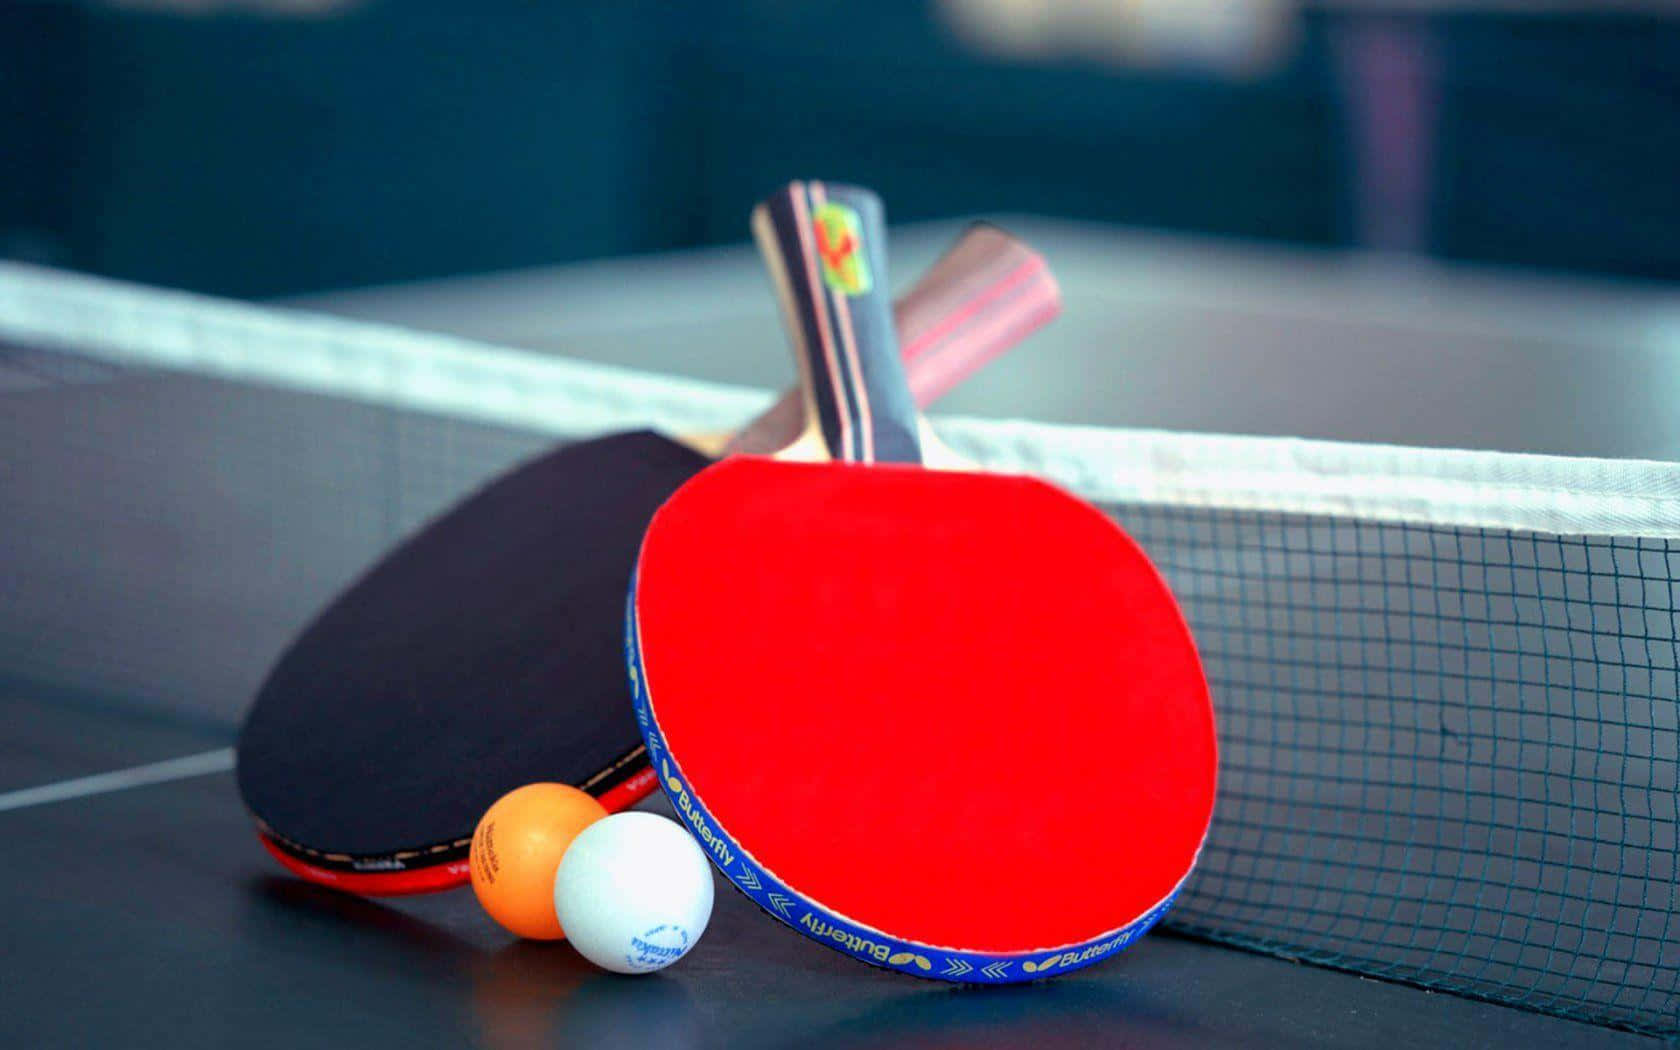 Ping Pong Paddles And Balls On A Table